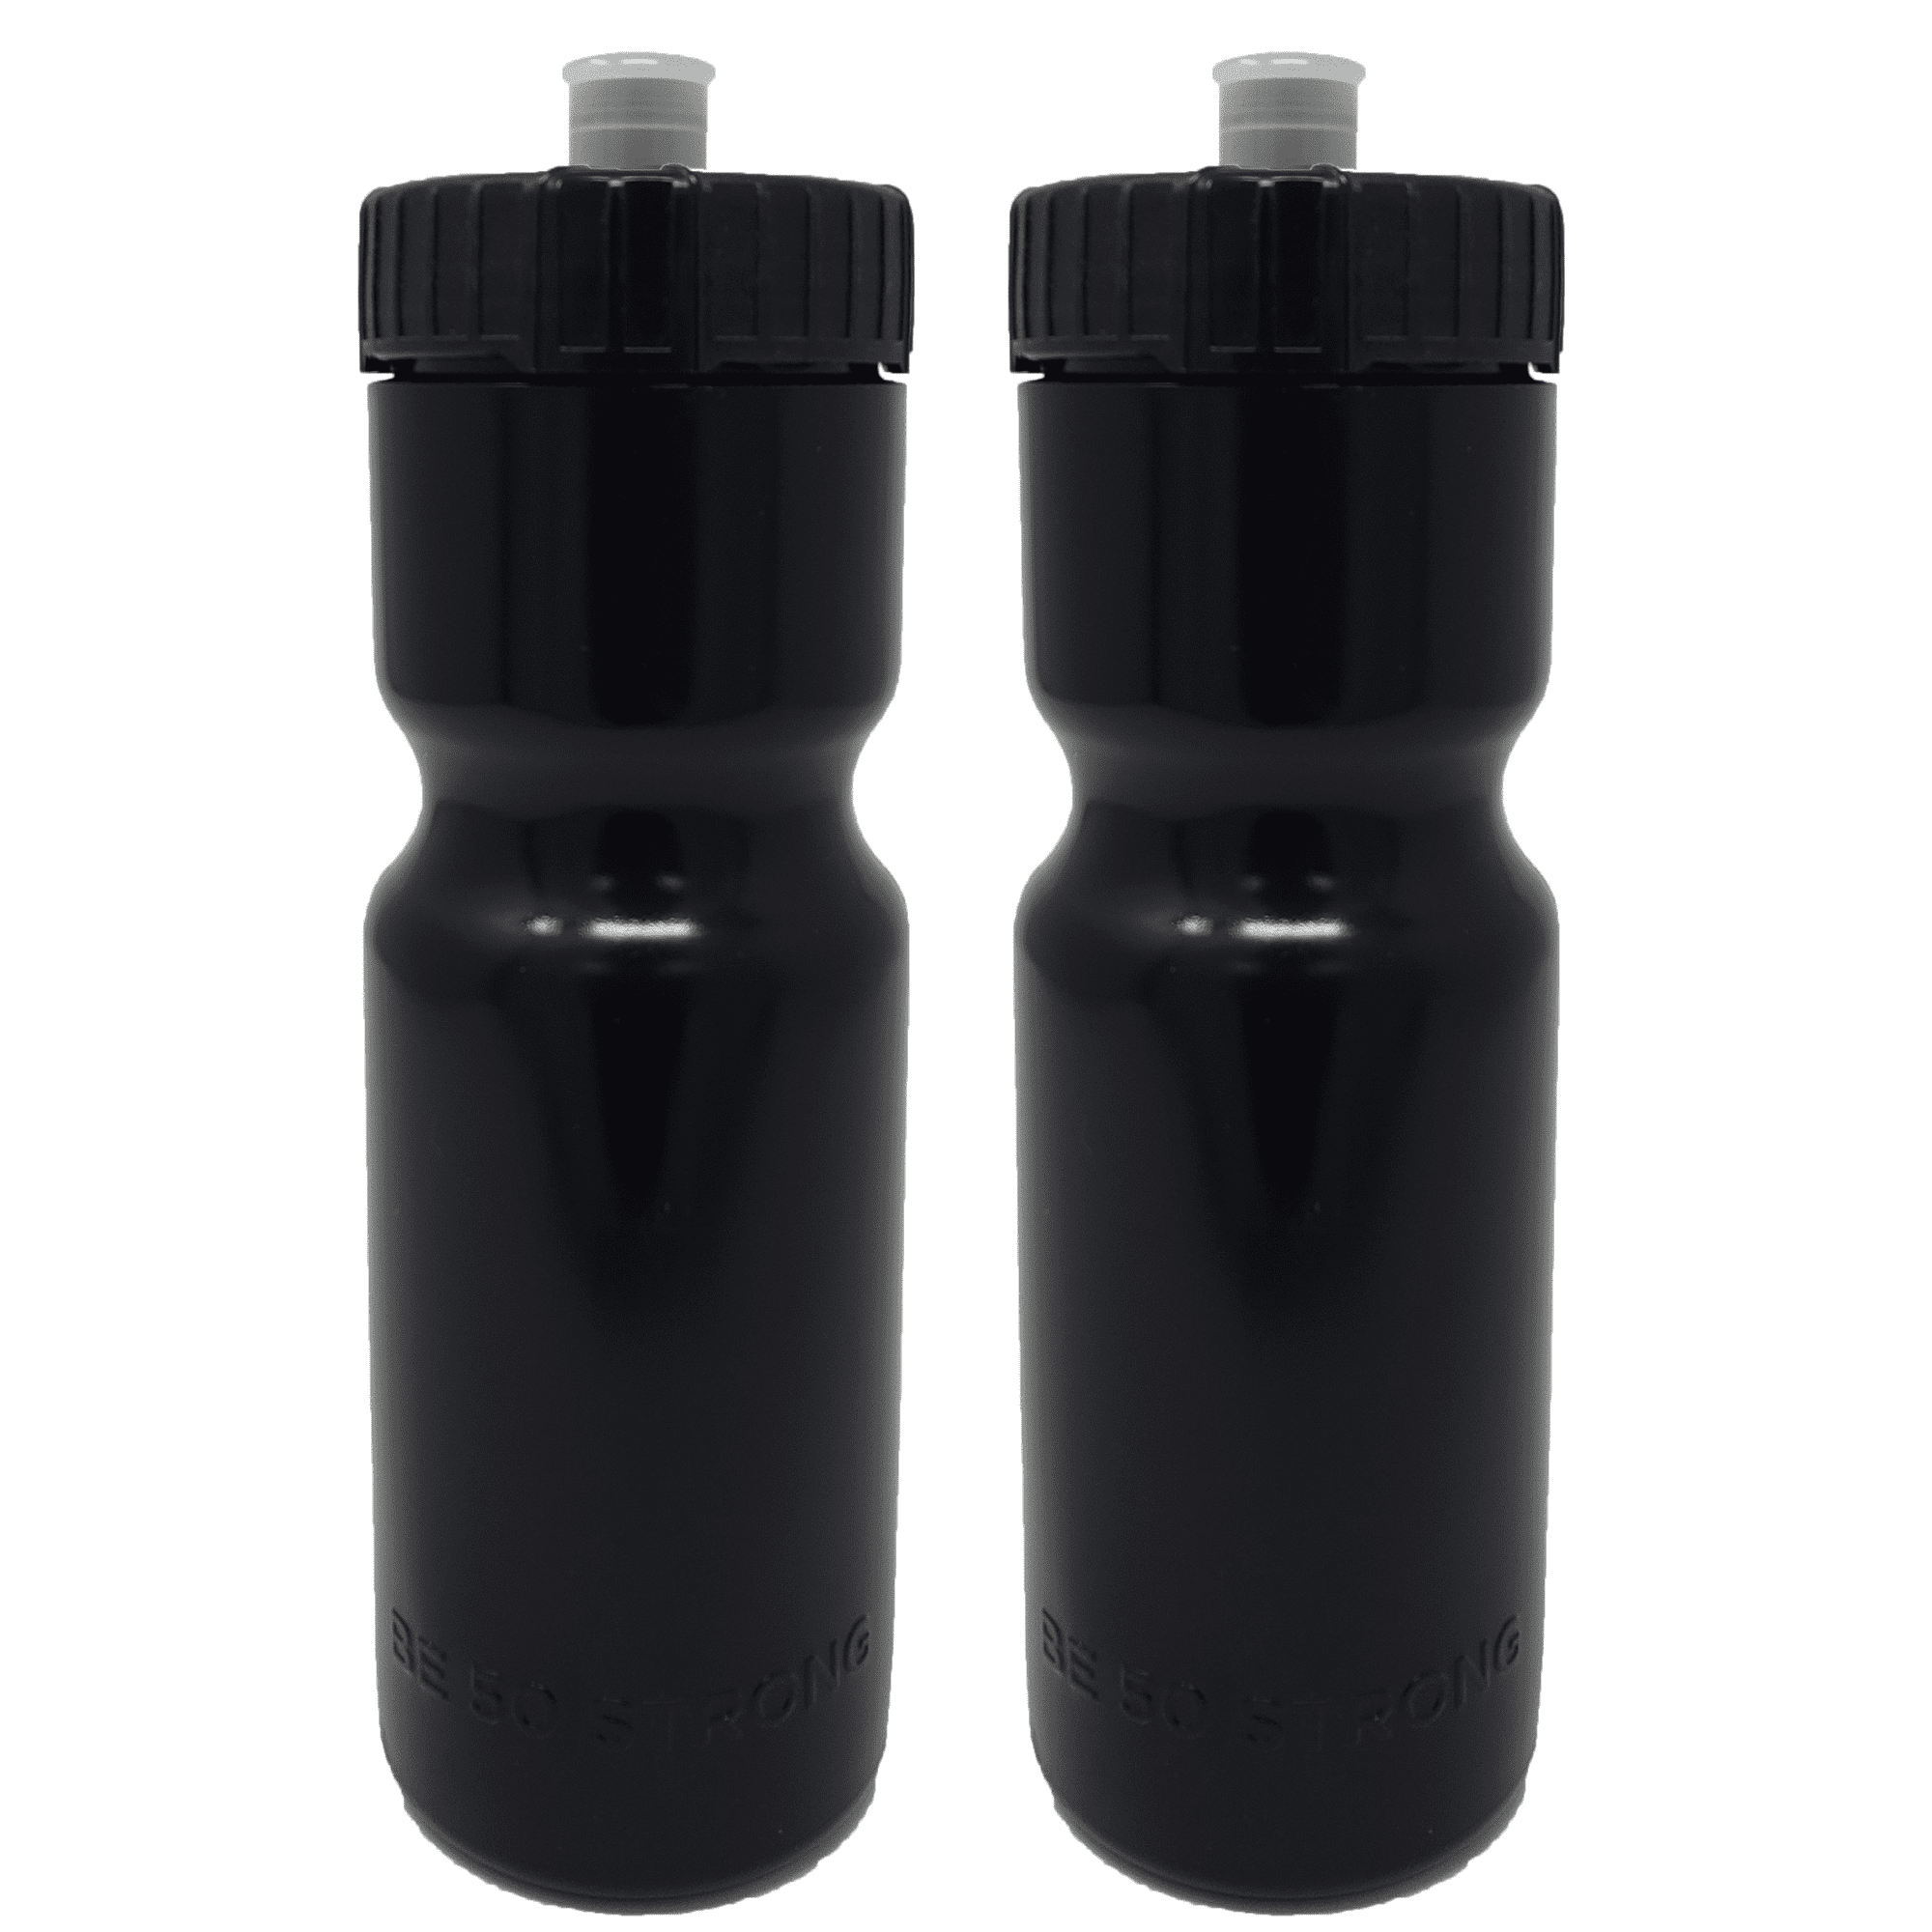 BPA Free Easy Open Push/Pull Cap USA Made Great for Adults & Kids 50 Strong Sports Squeeze Water Bottle 2 Pack Bottles Fit in Bike Cages Top Rack Dishwasher Safe 22 oz